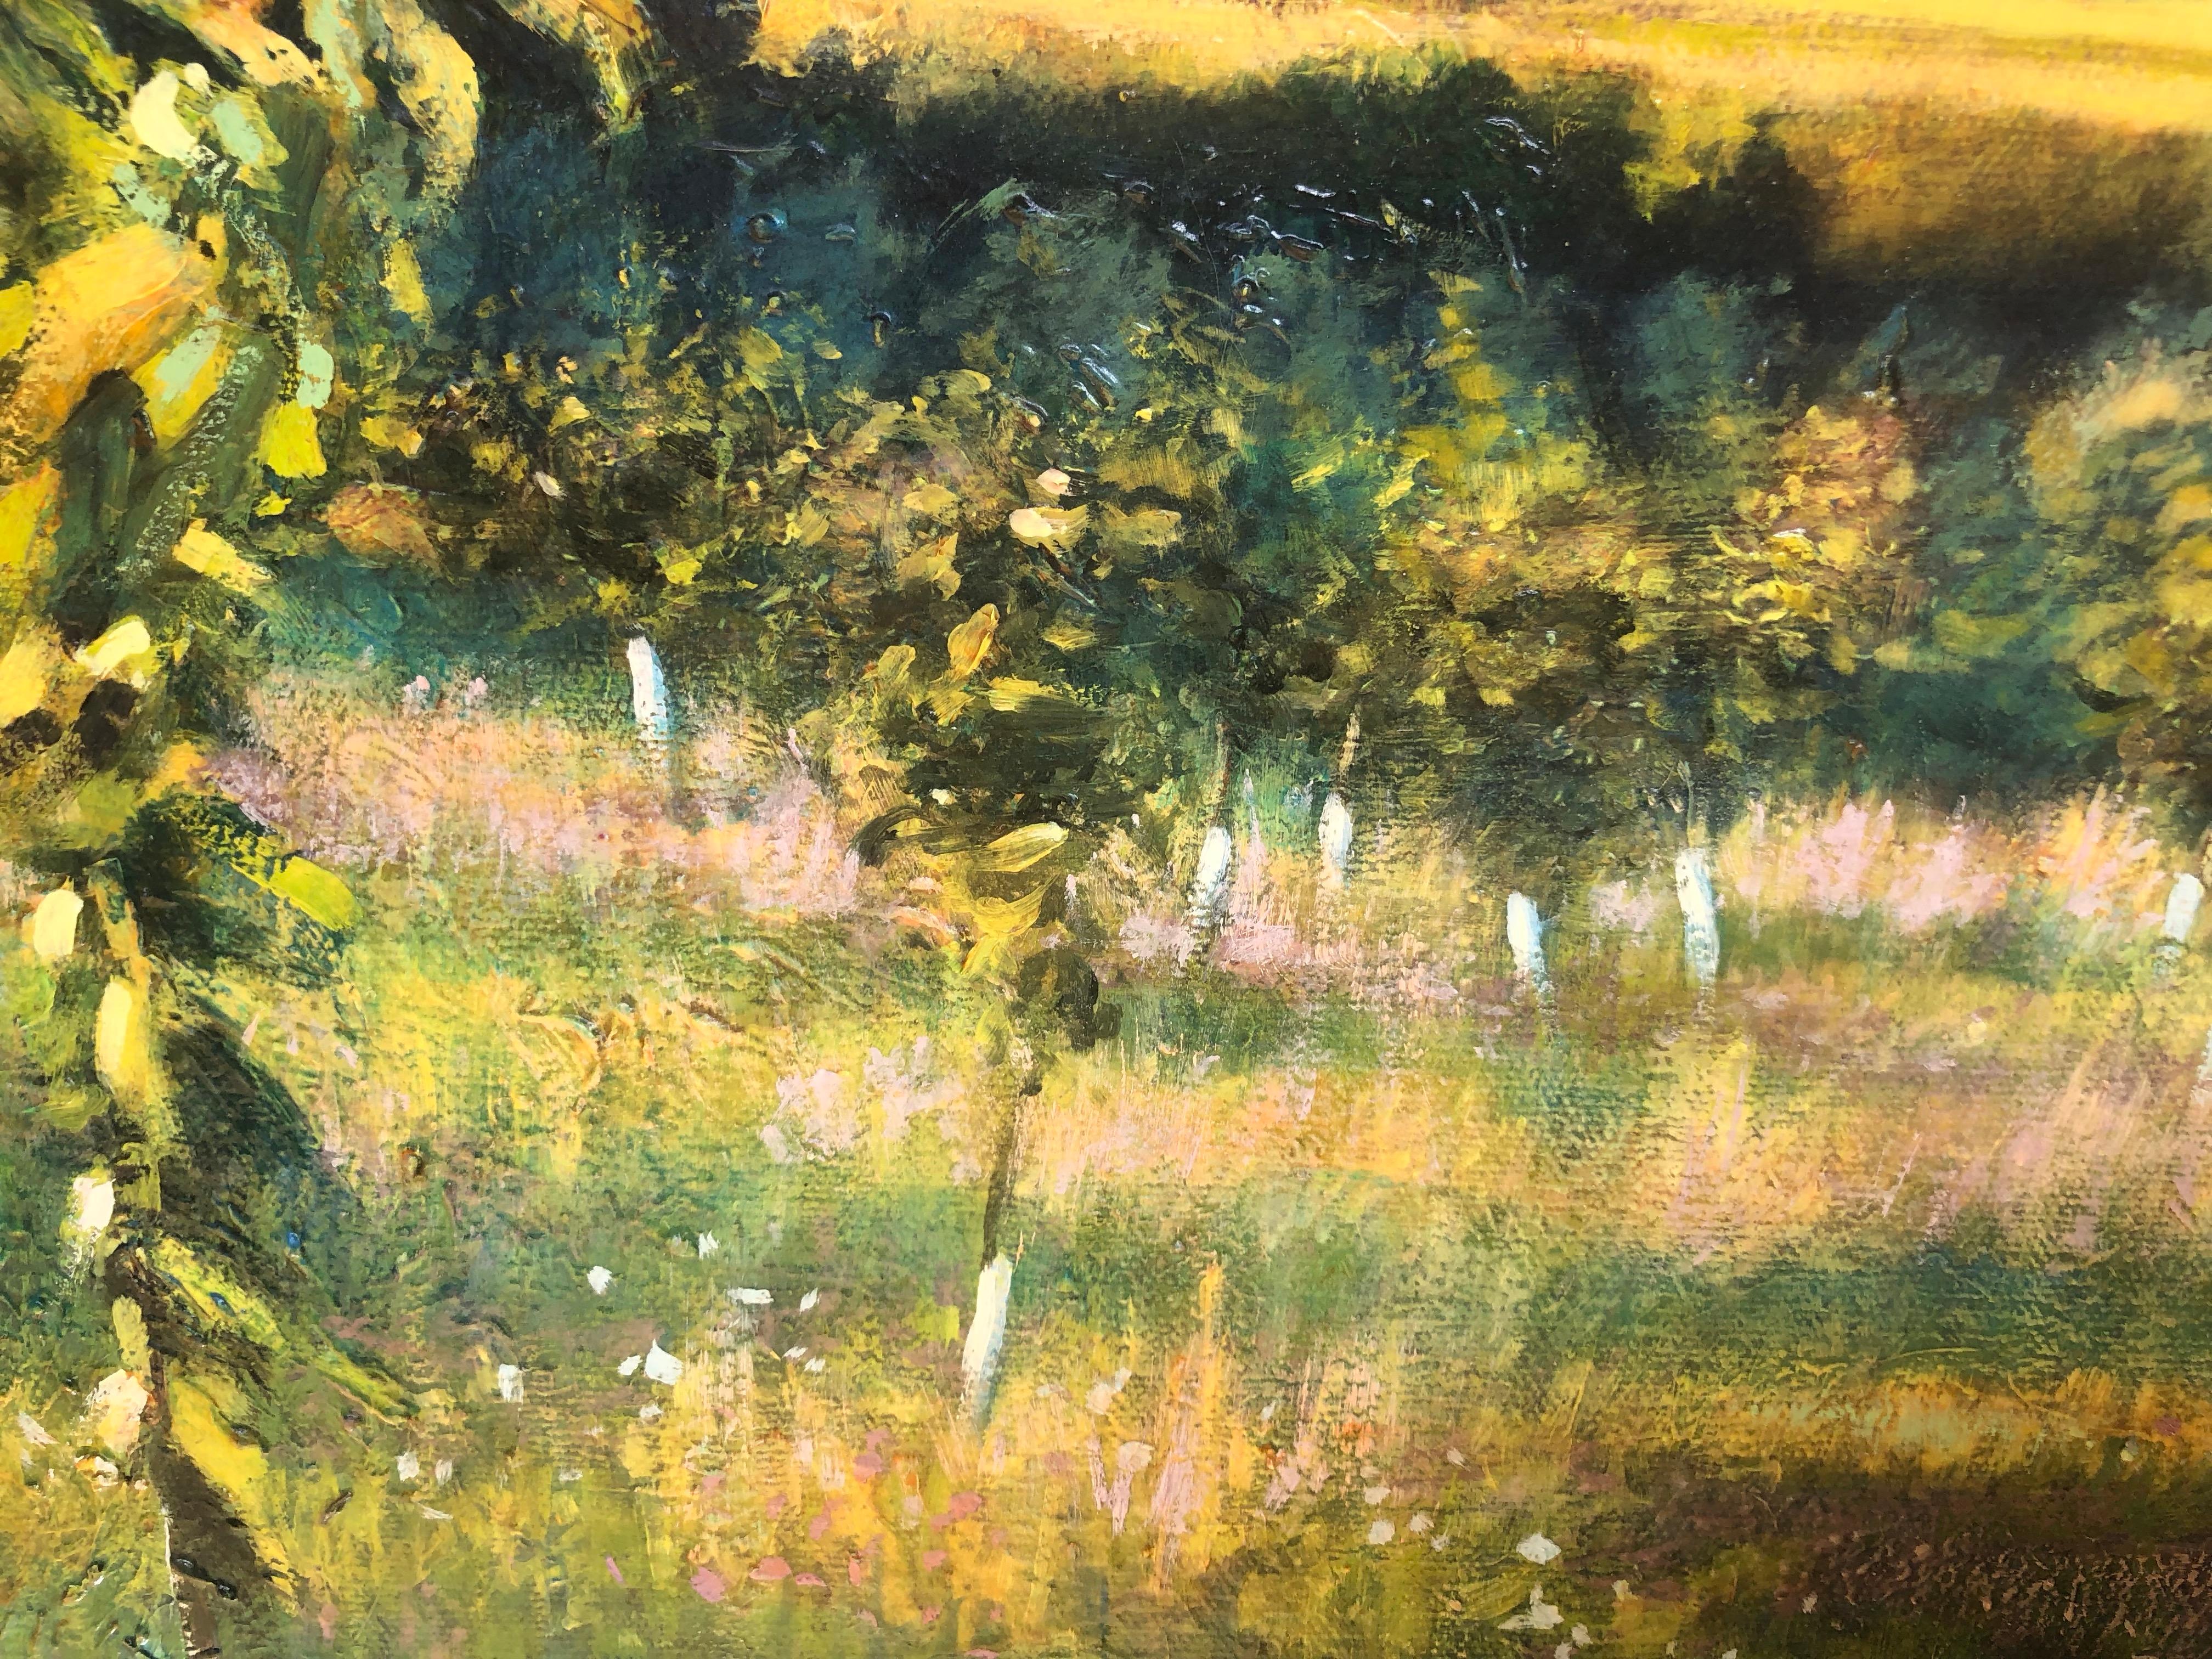 Orchard Path - Original Oil Painting of Orchard and Hills Bathed in Spring Light 6